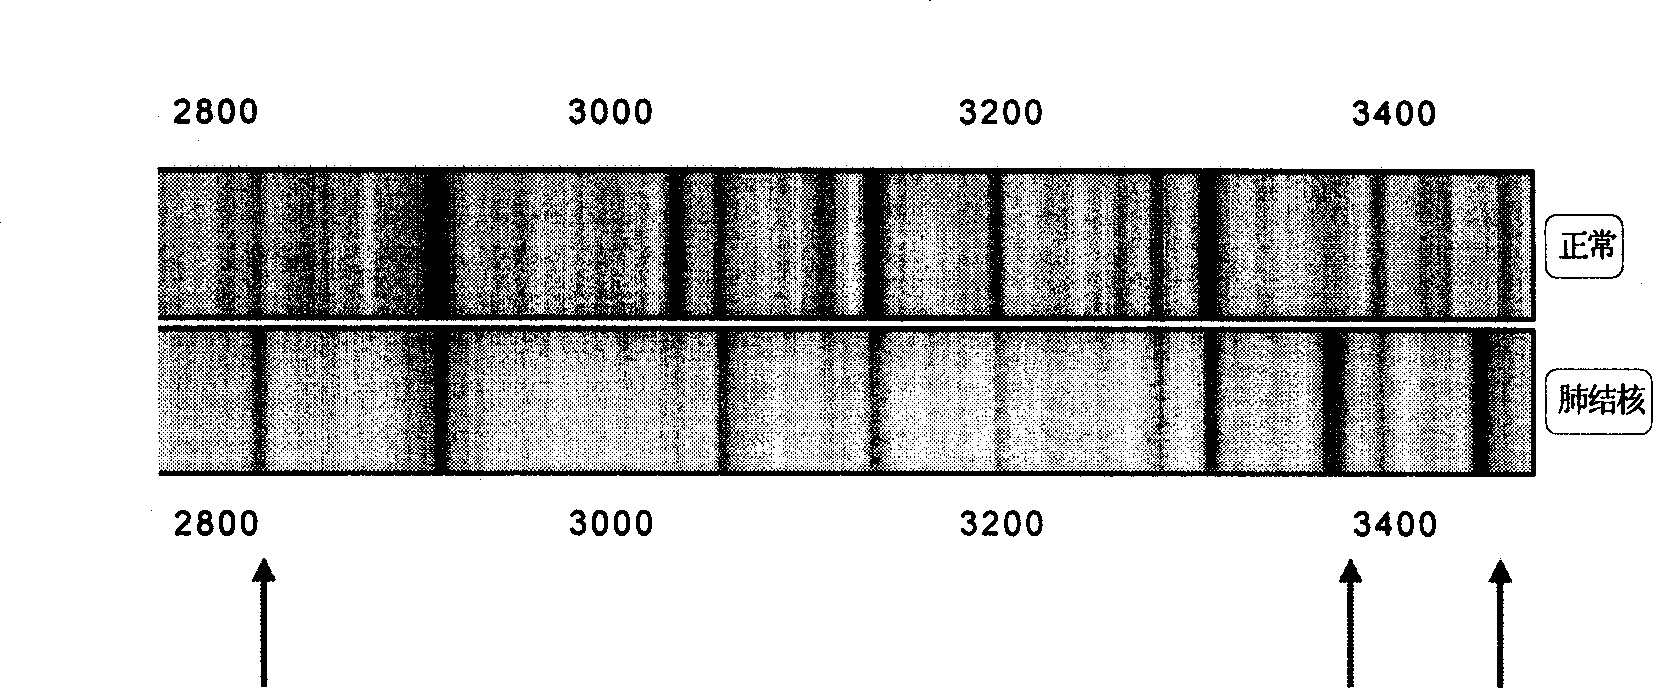 Mass spectrometry reagent kit and method for rapid tuberculosis diagnosis